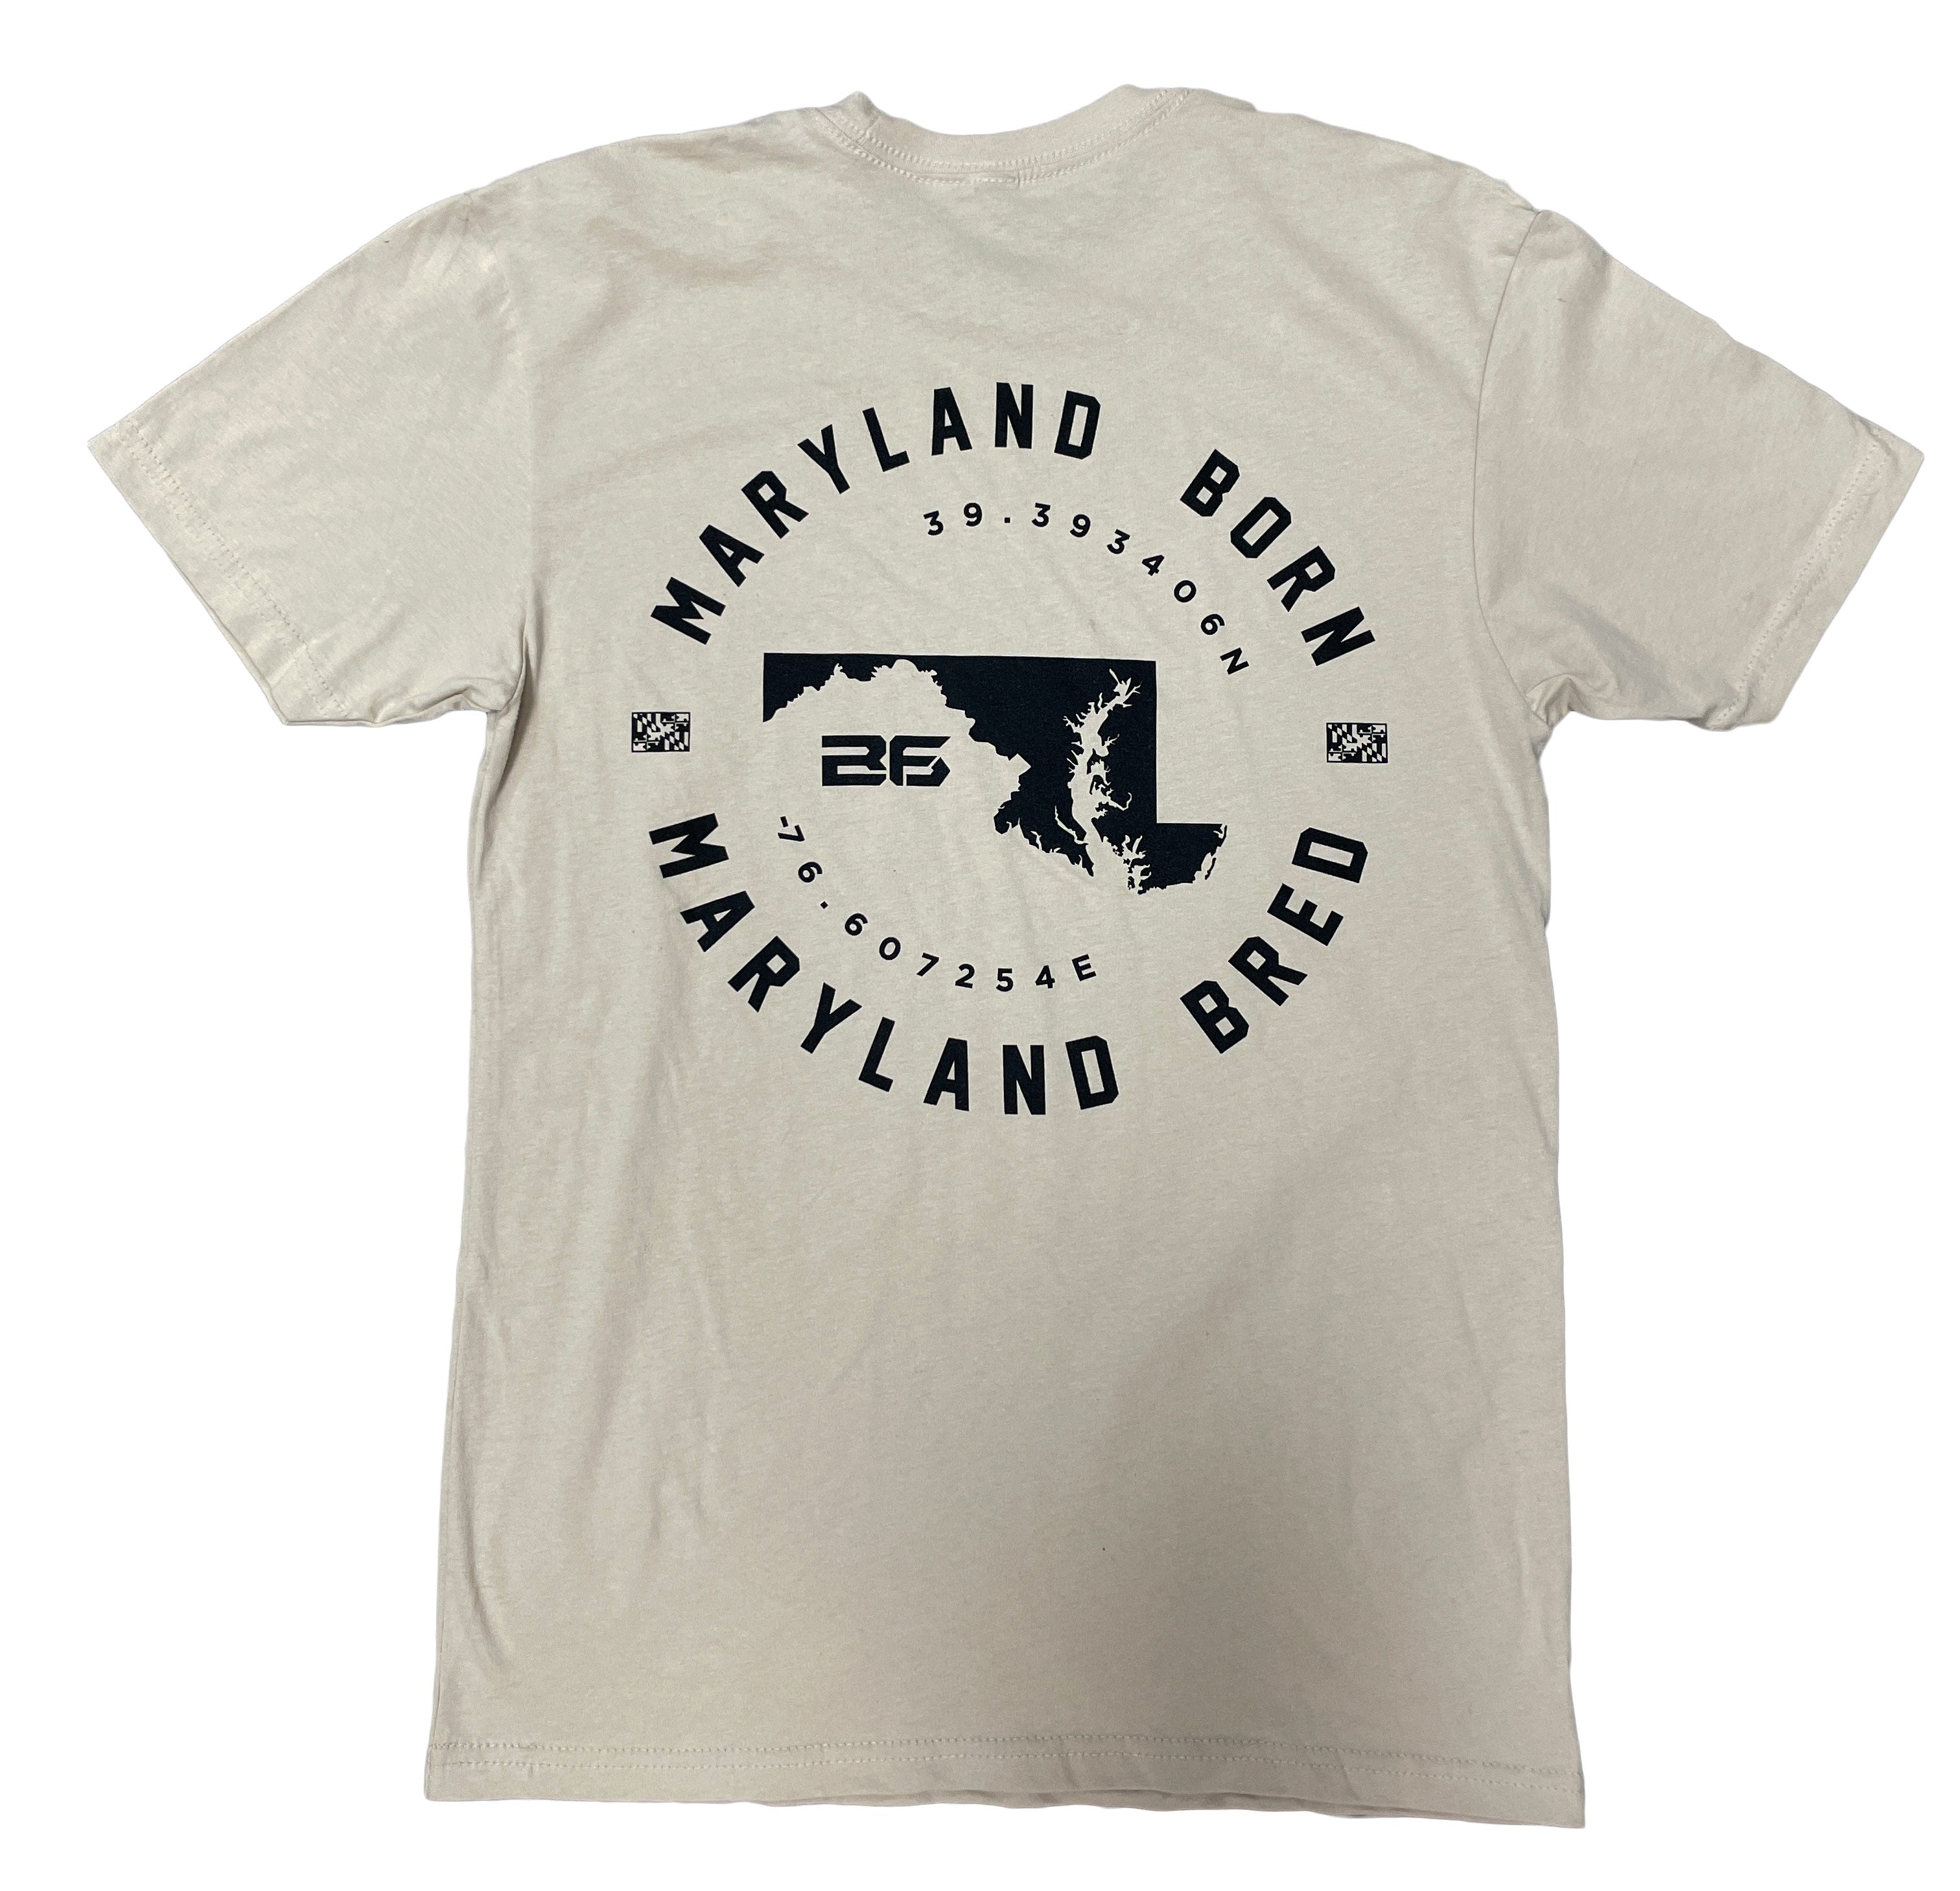 Bryce Frederick - Maryland Born, Maryland Bred Logo (Tan) / Shirt - Route One Apparel